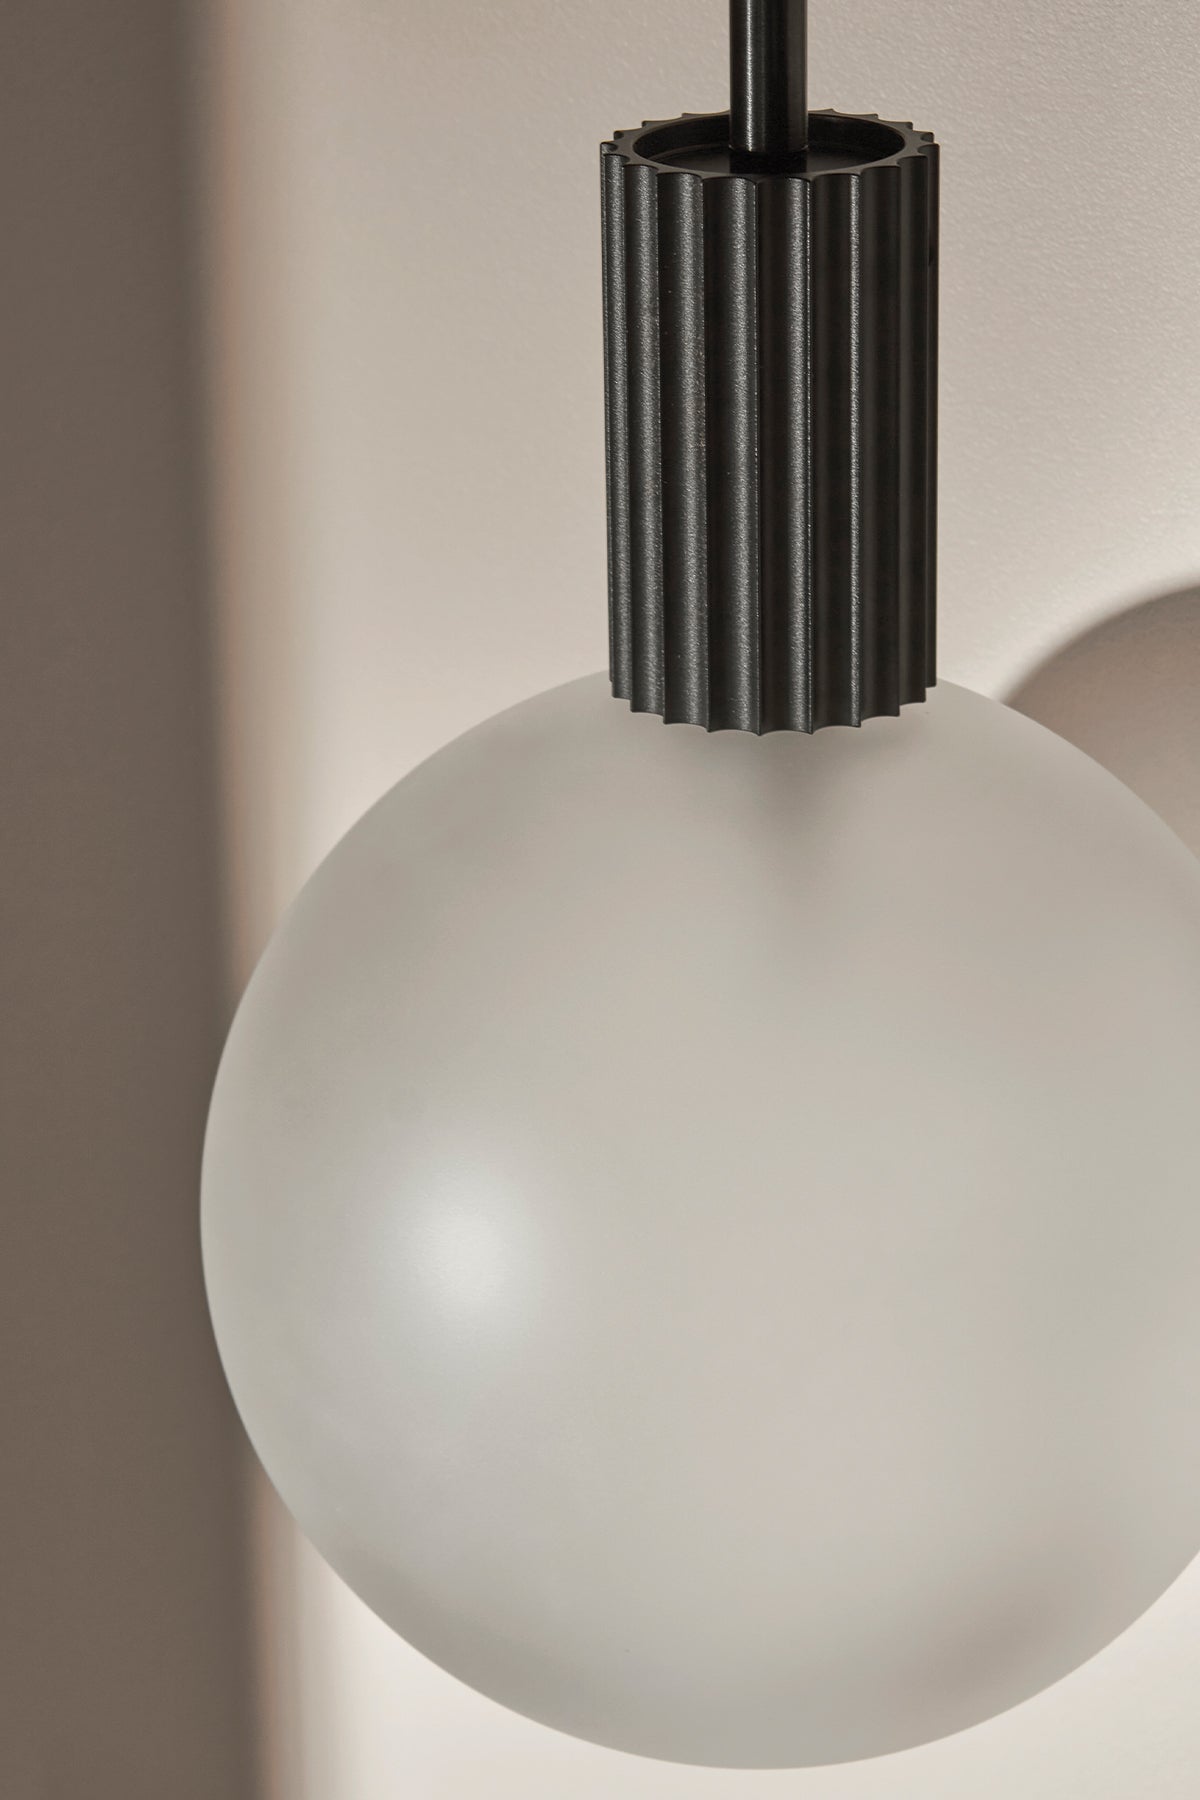 Attalos Pendant Light, 200 in Brushed Black. Image by Lawrence Furzey